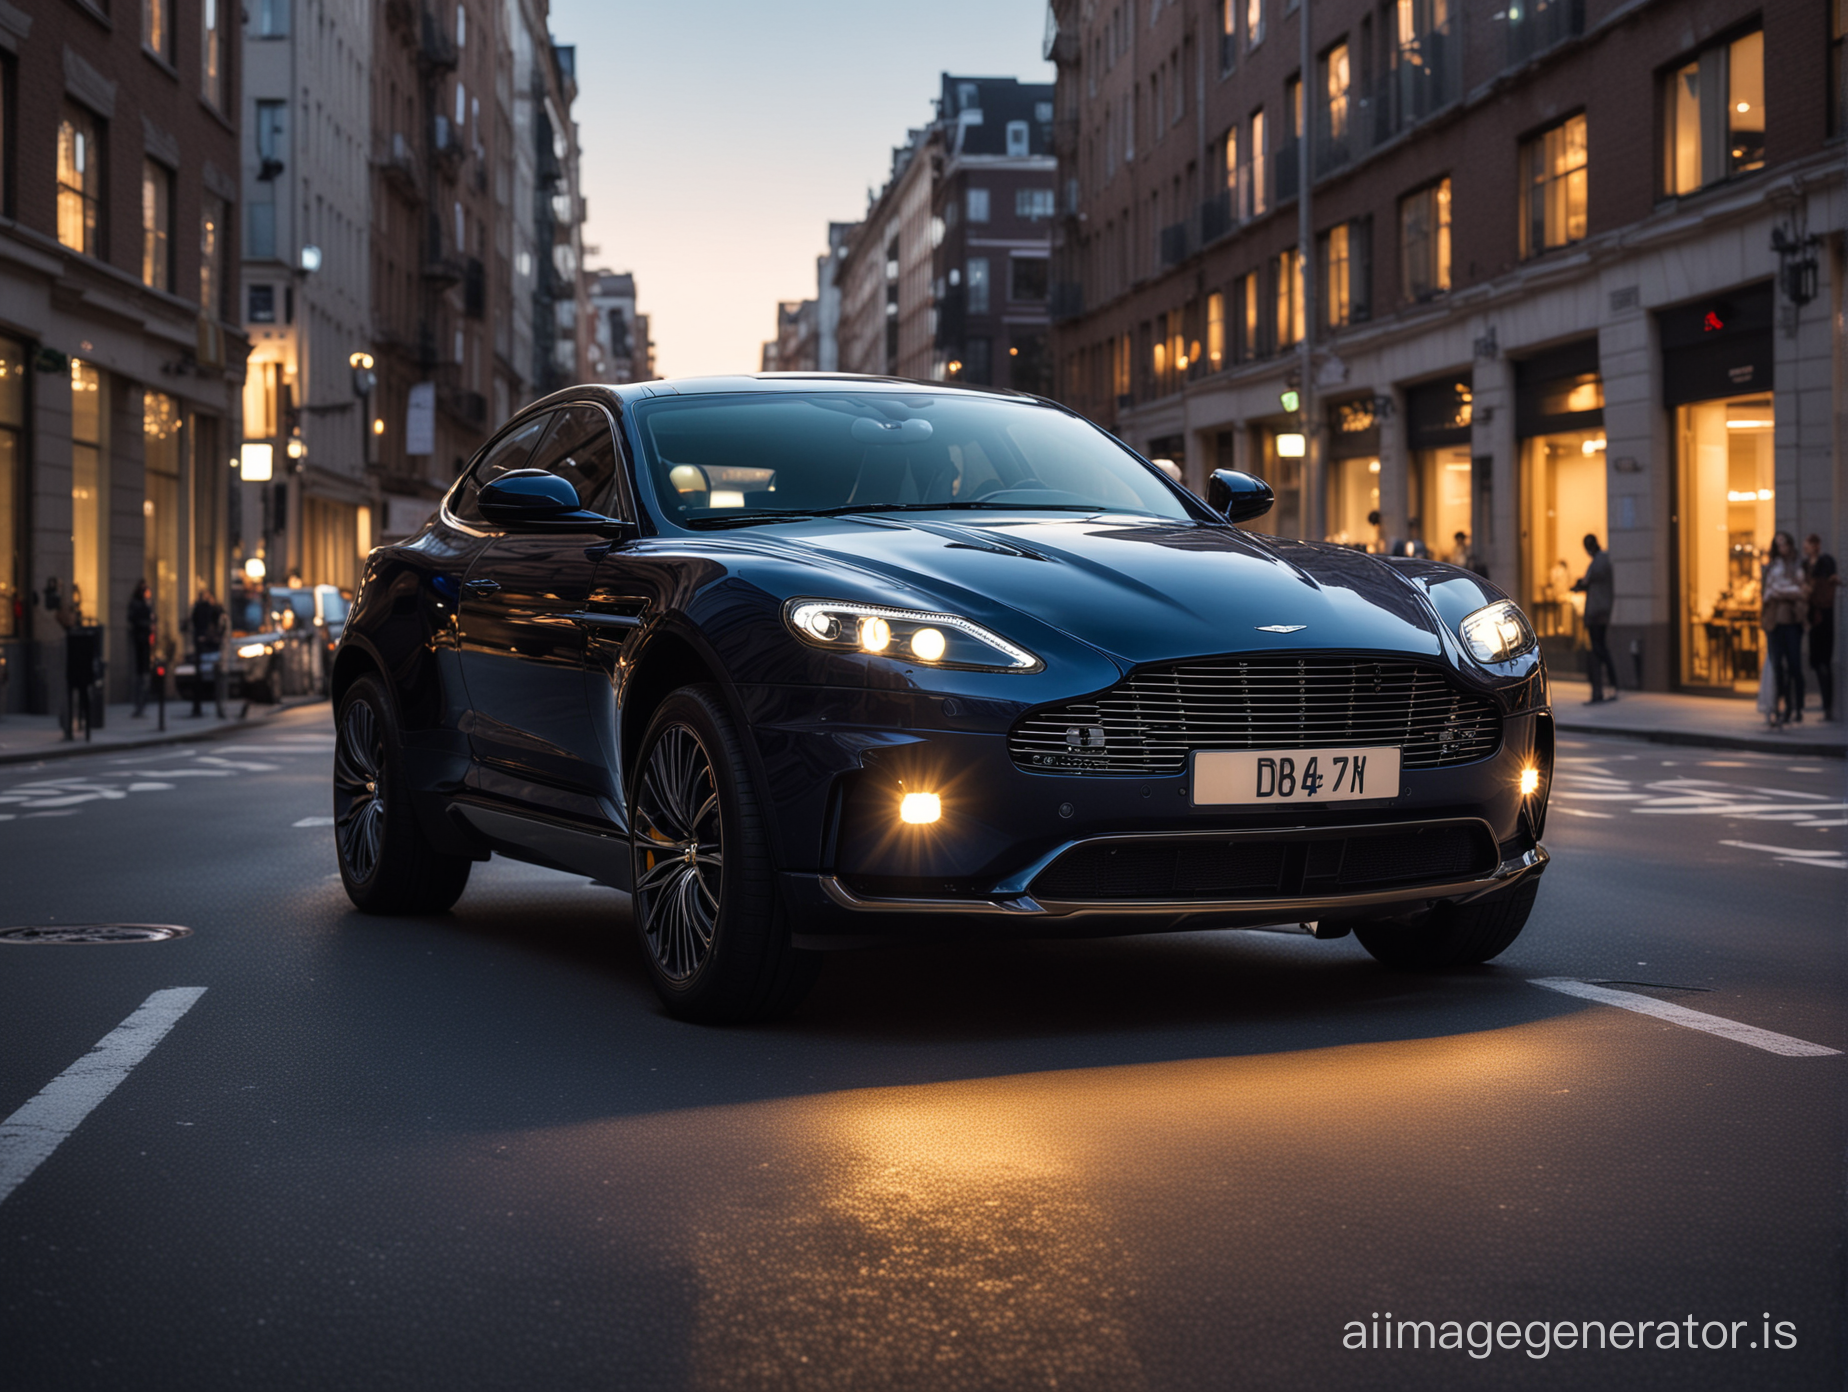 Photograph of an Aston Martin SUV inspired by the Aston Martin DB9. Big headlights, deep dark blue color In busy modern city, golden hour